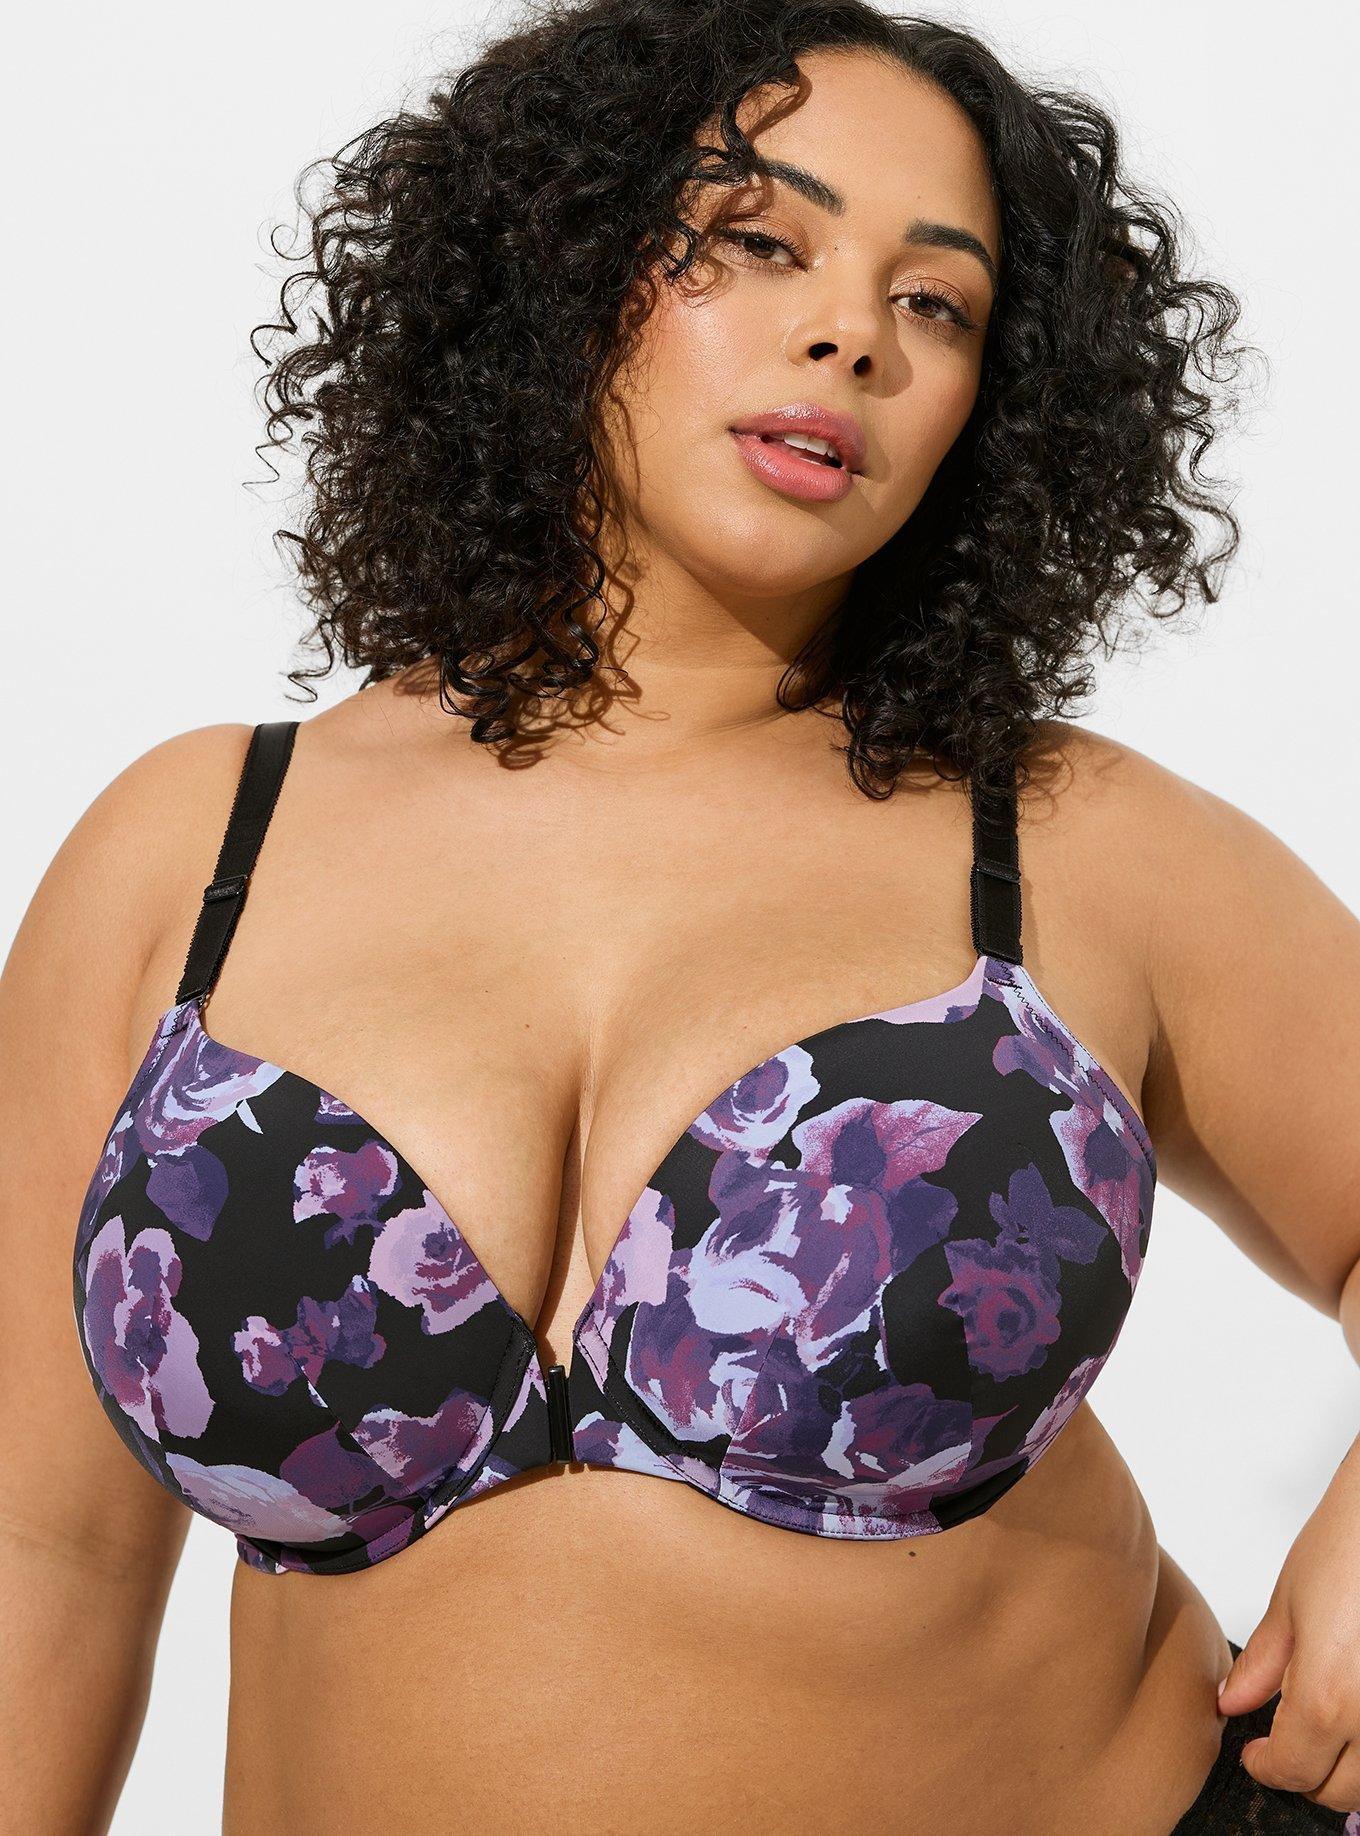 PRETTYWELL Front Closure Bras for Women no Underwire Padded